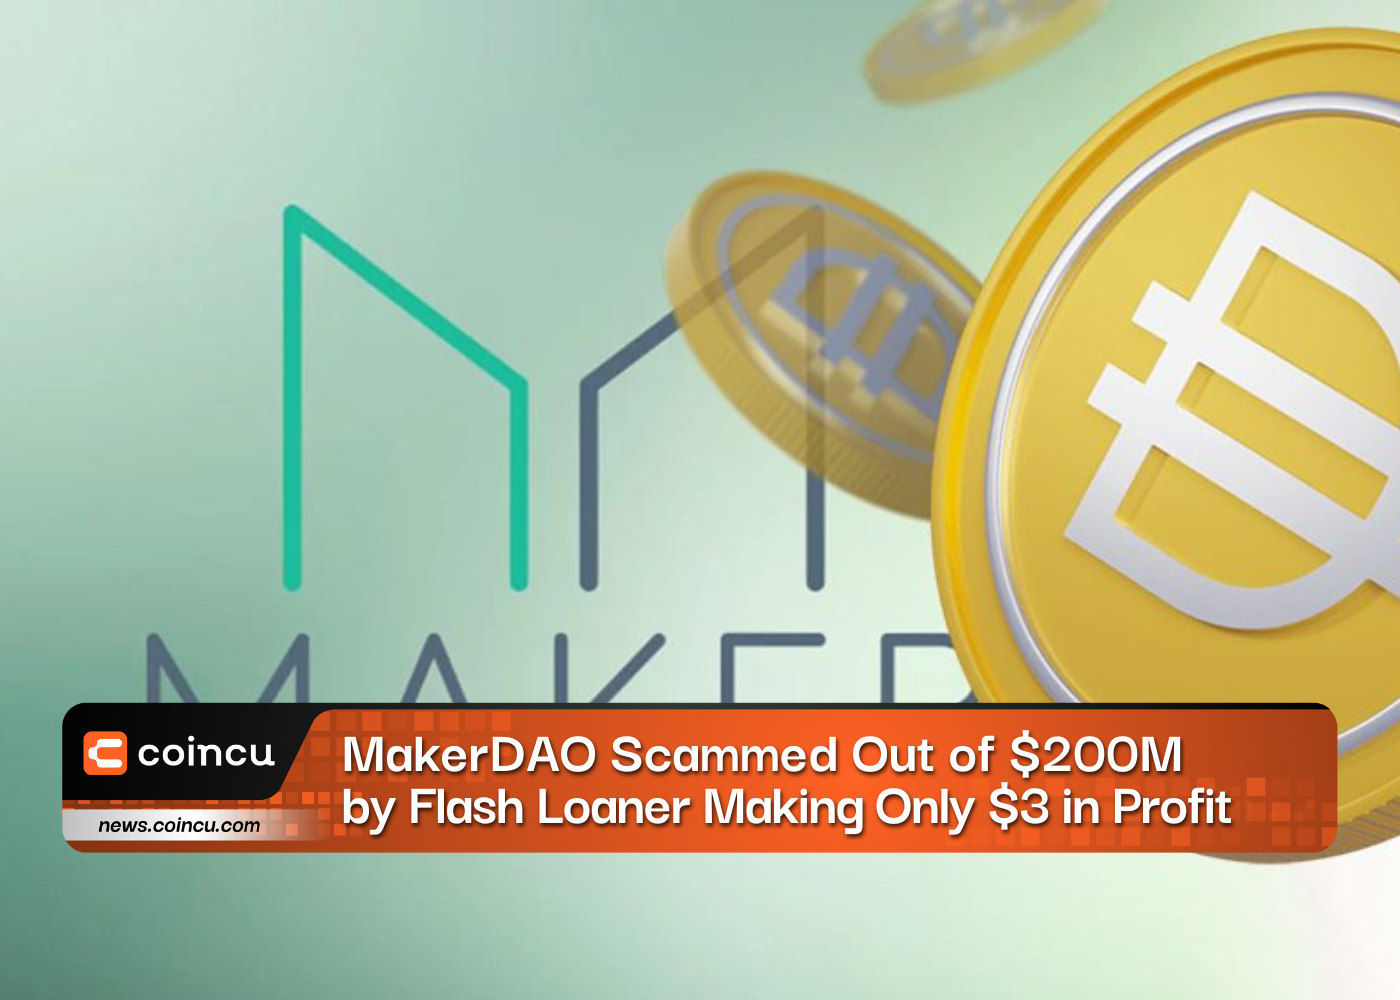 MakerDAO Scammed Out of 200M